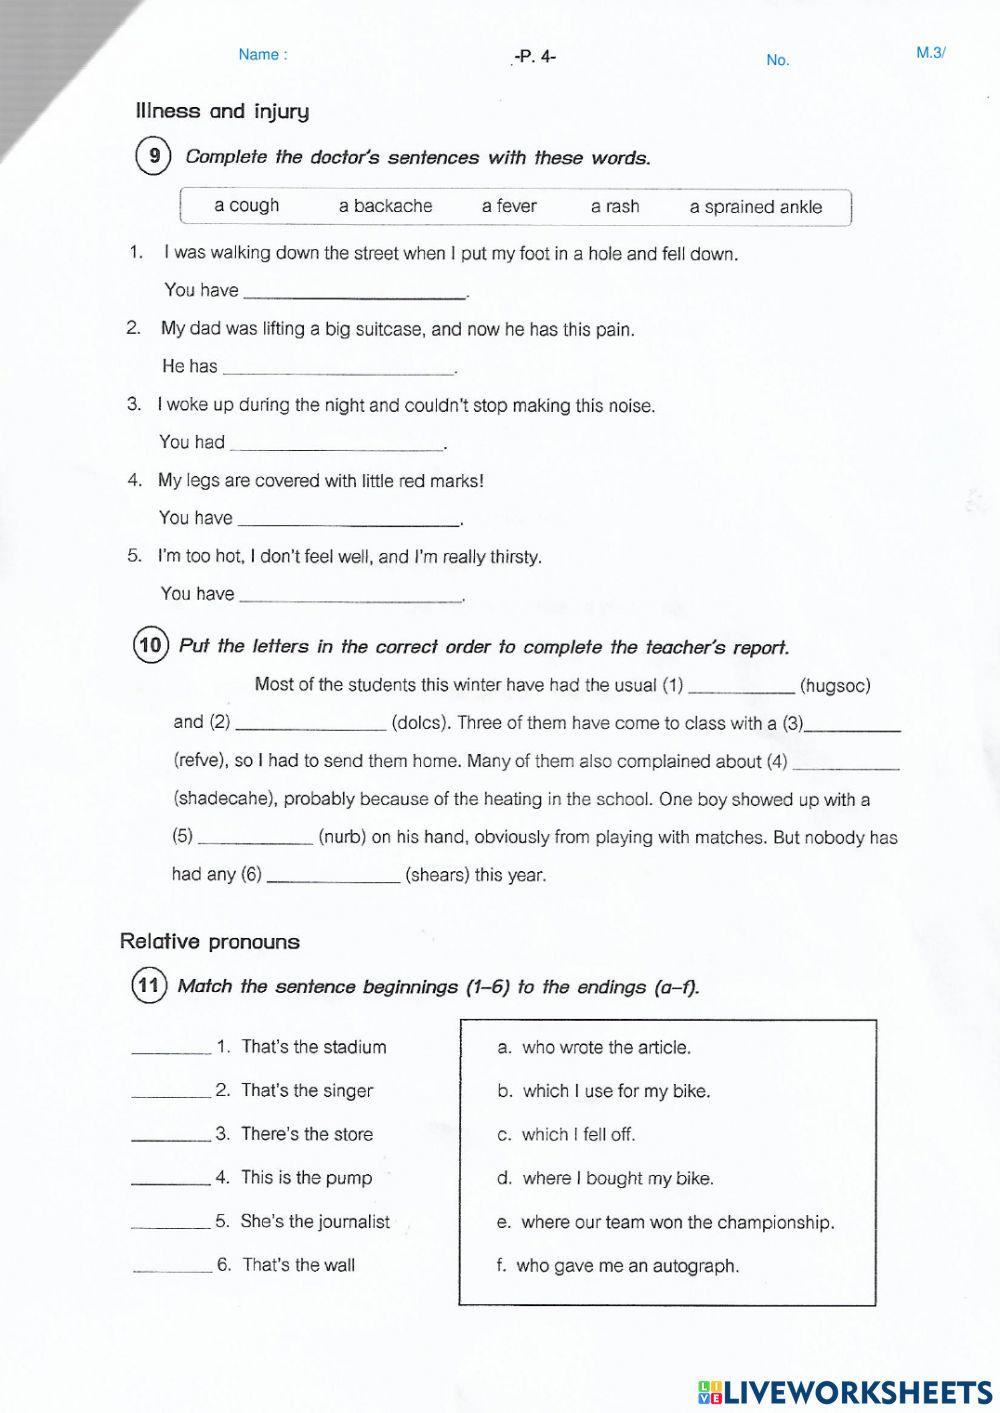 Exercise P.4-5